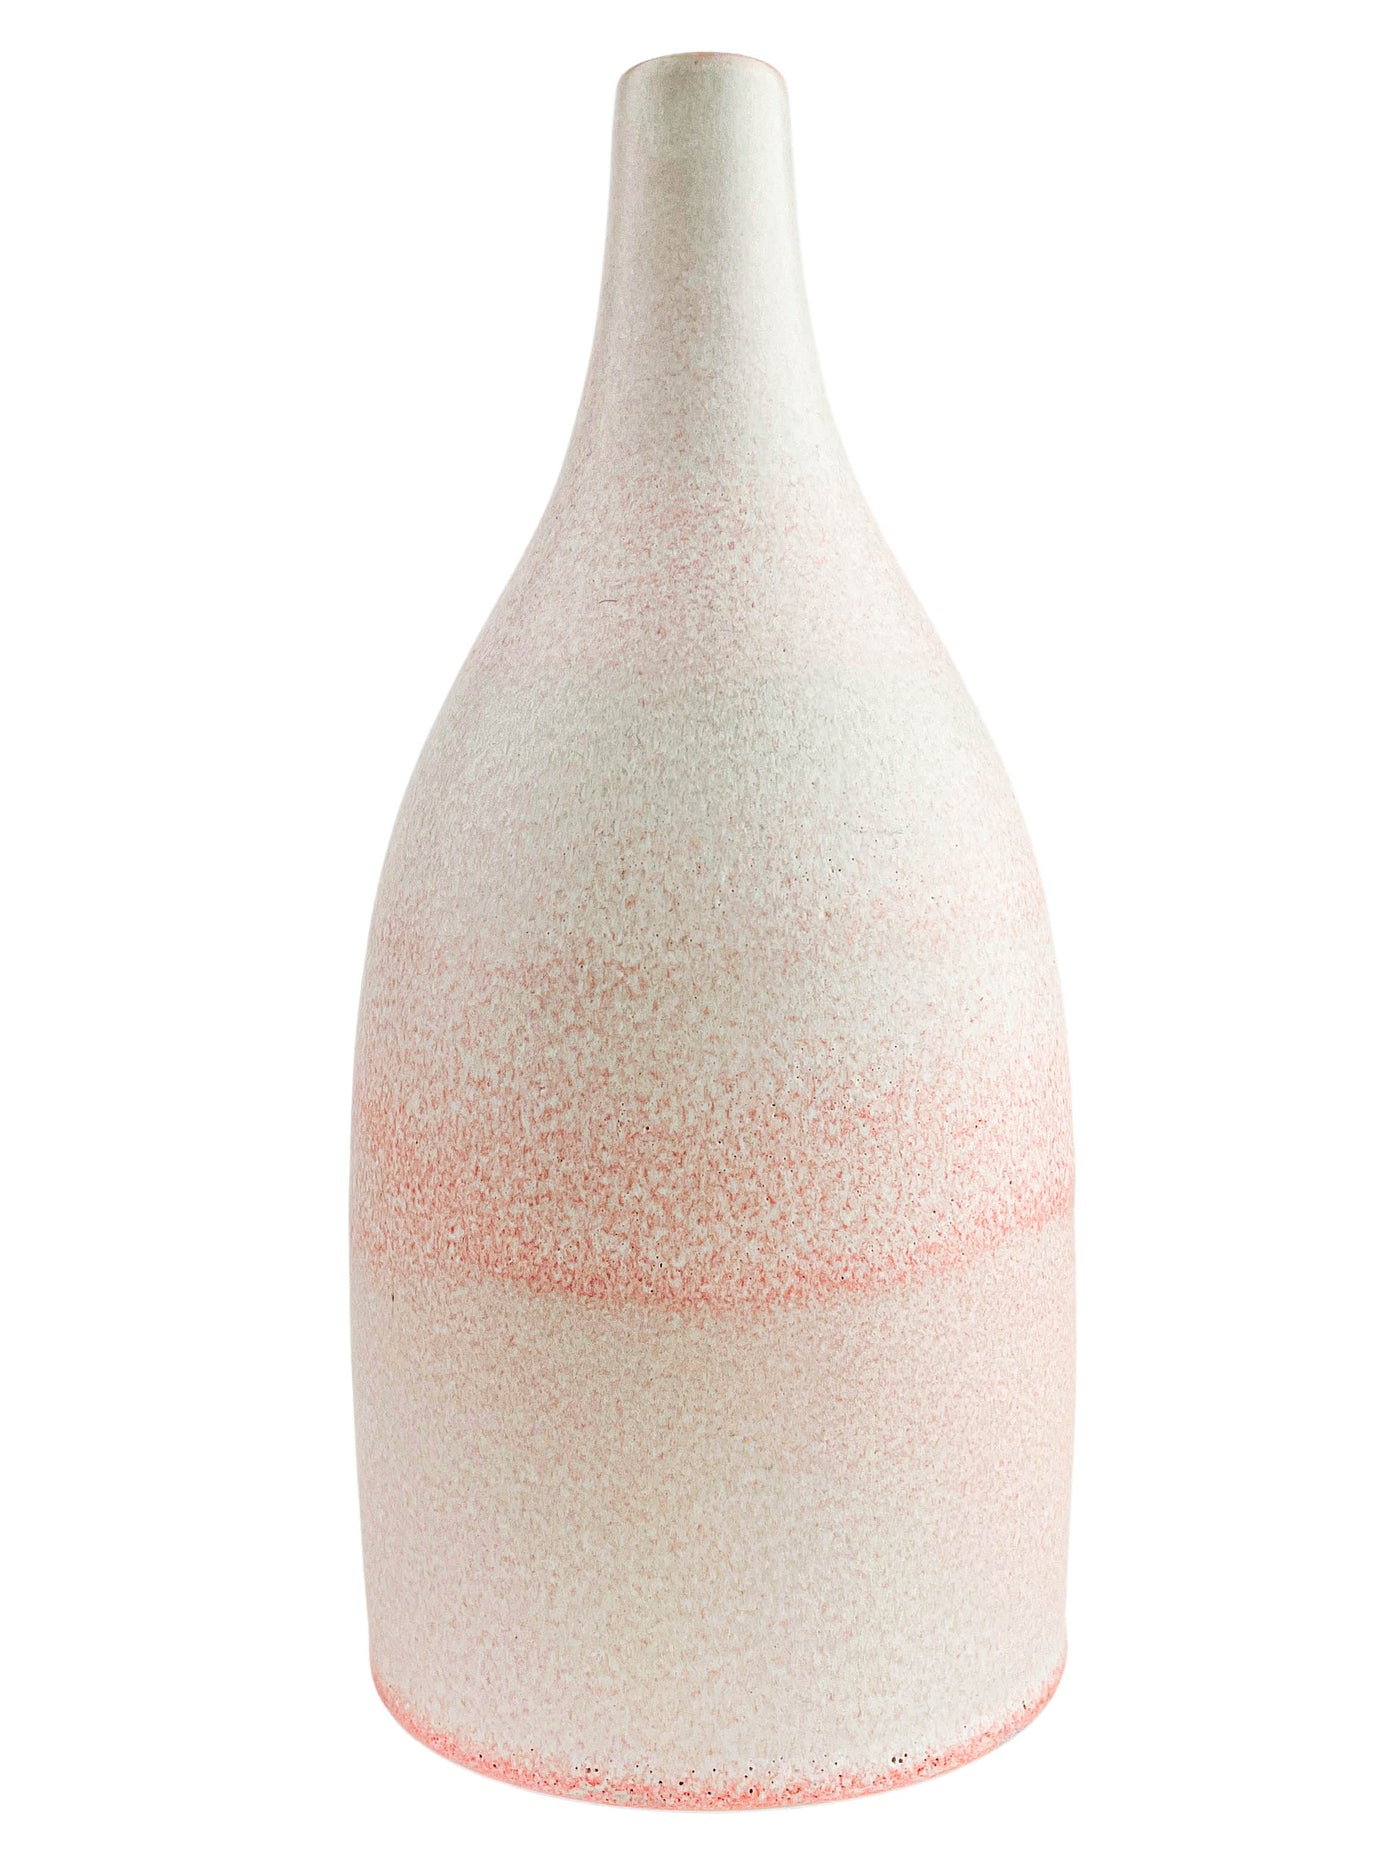 Tortus Classic Bottle Vase in Pink - Discounts on Tortus at UAL